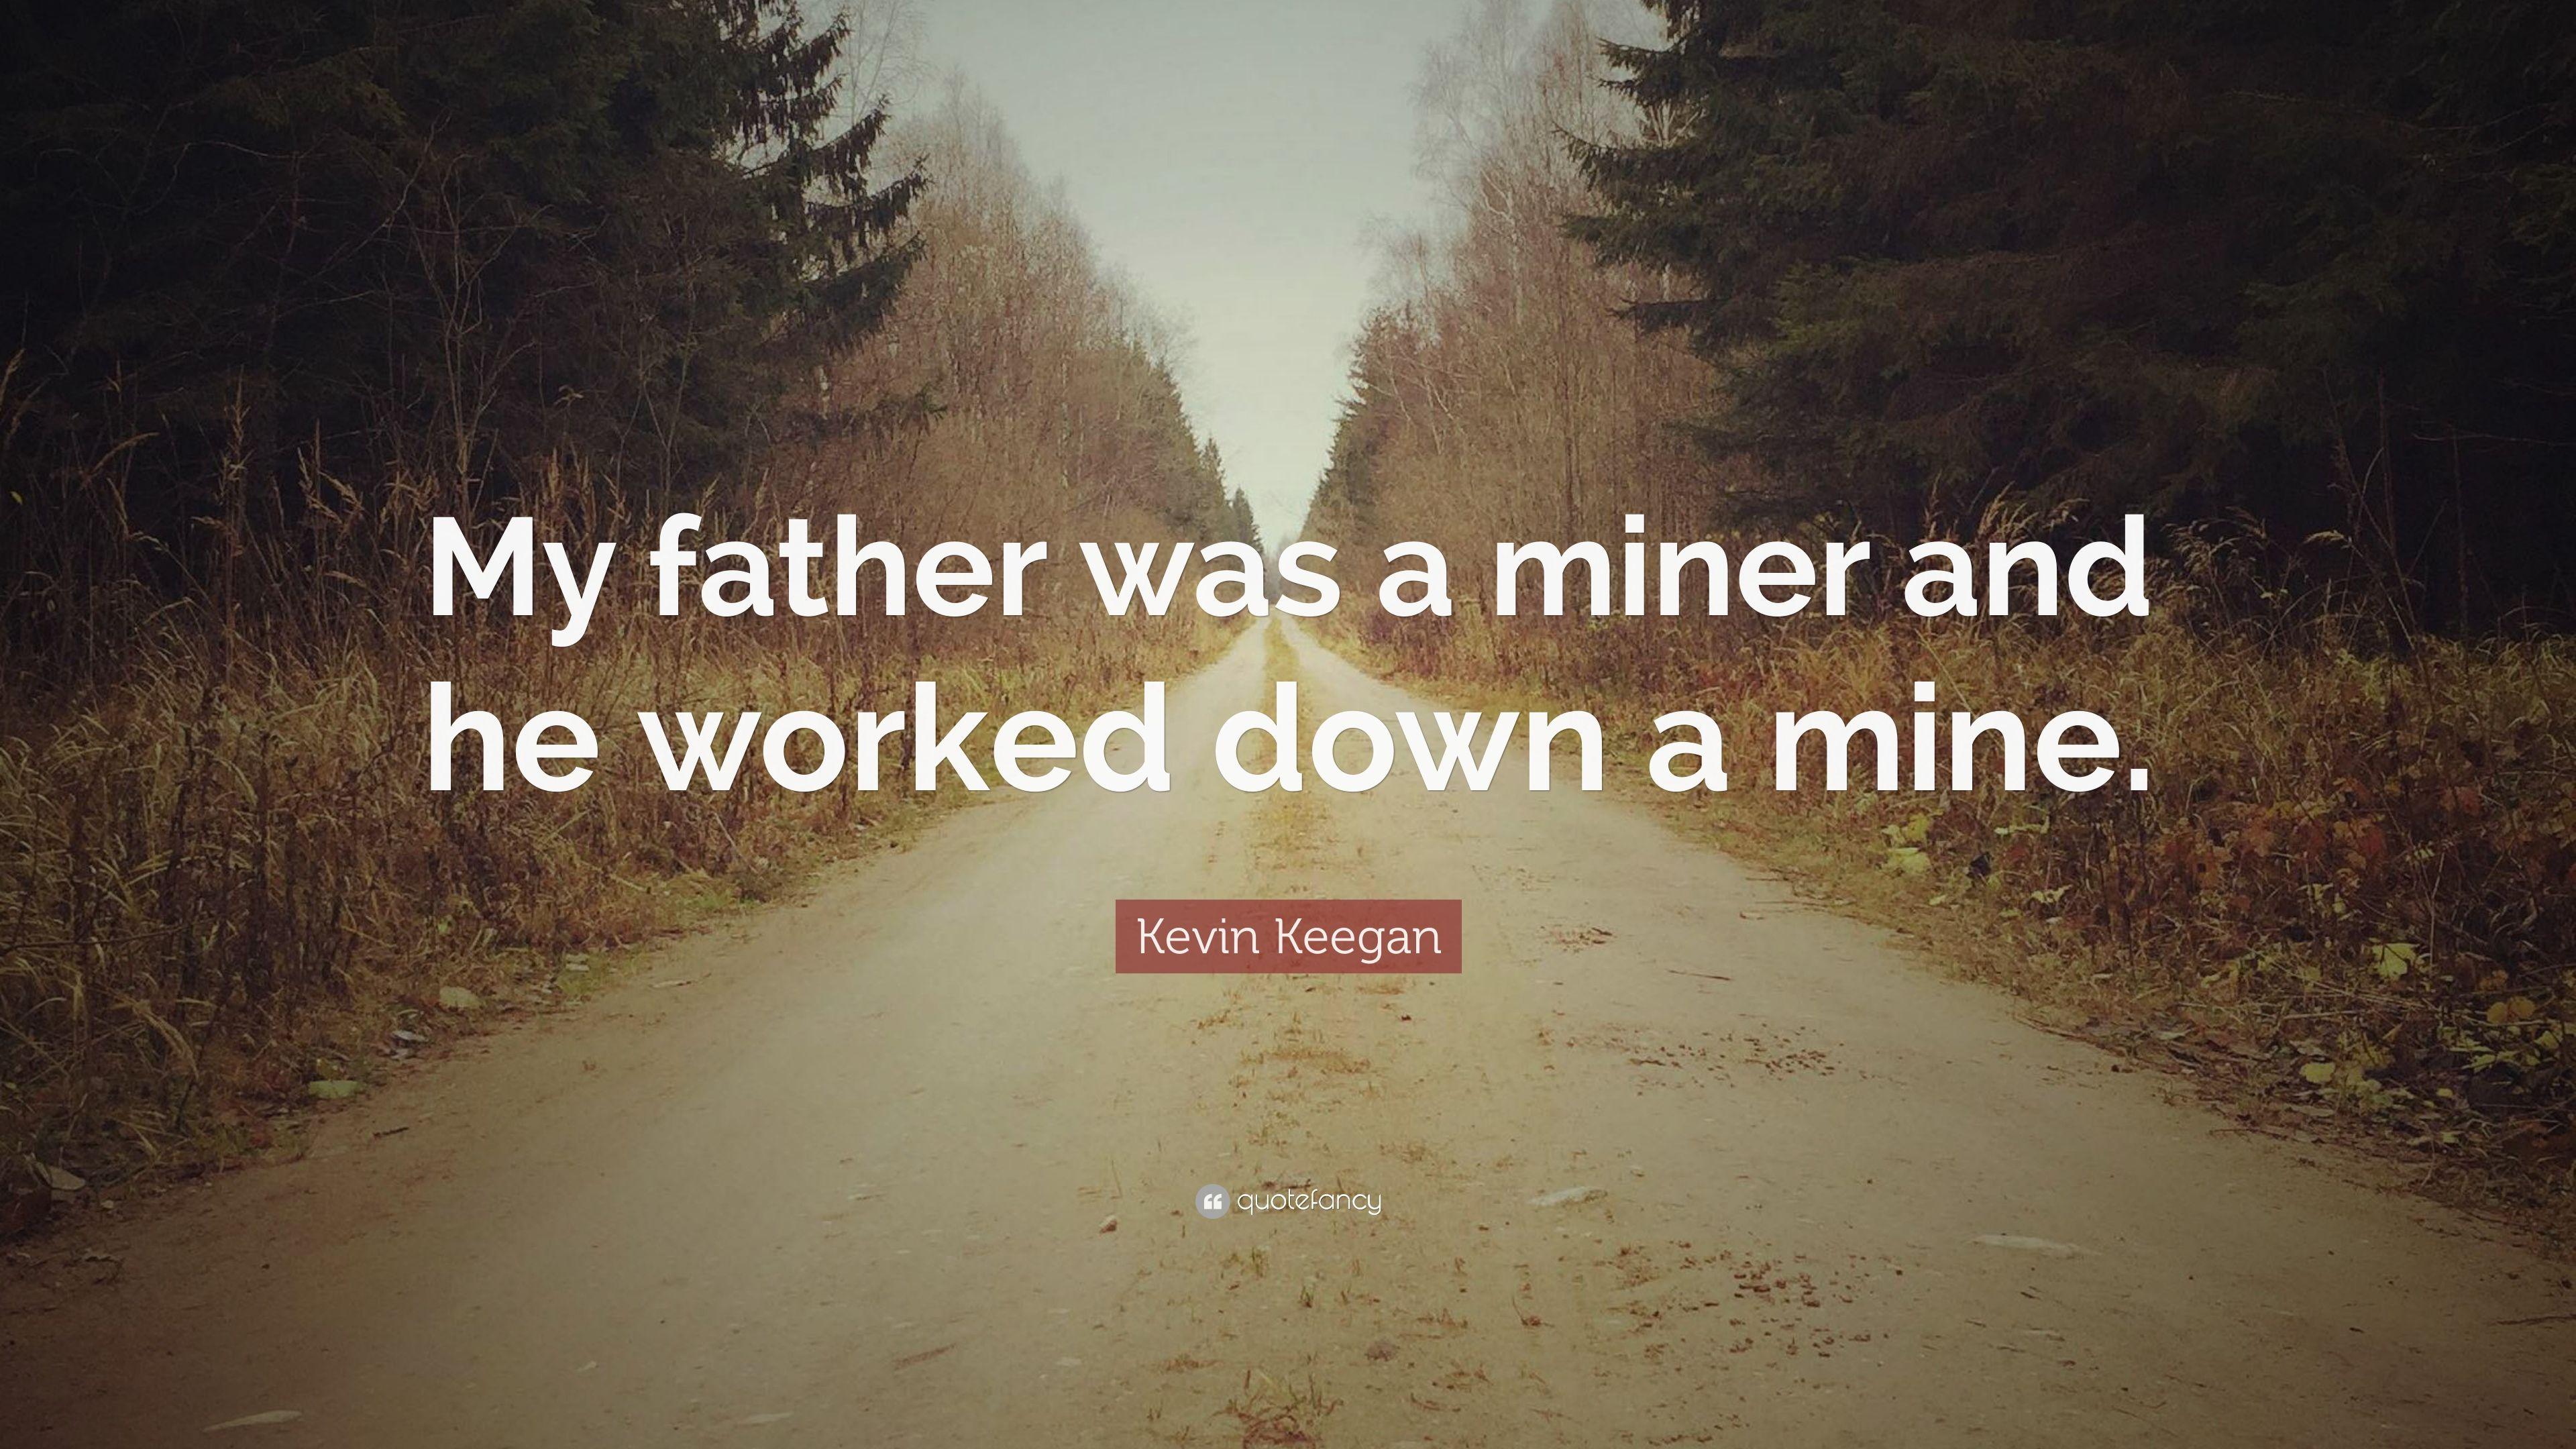 Kevin Keegan Quote: “My father was a miner and he worked down a mine